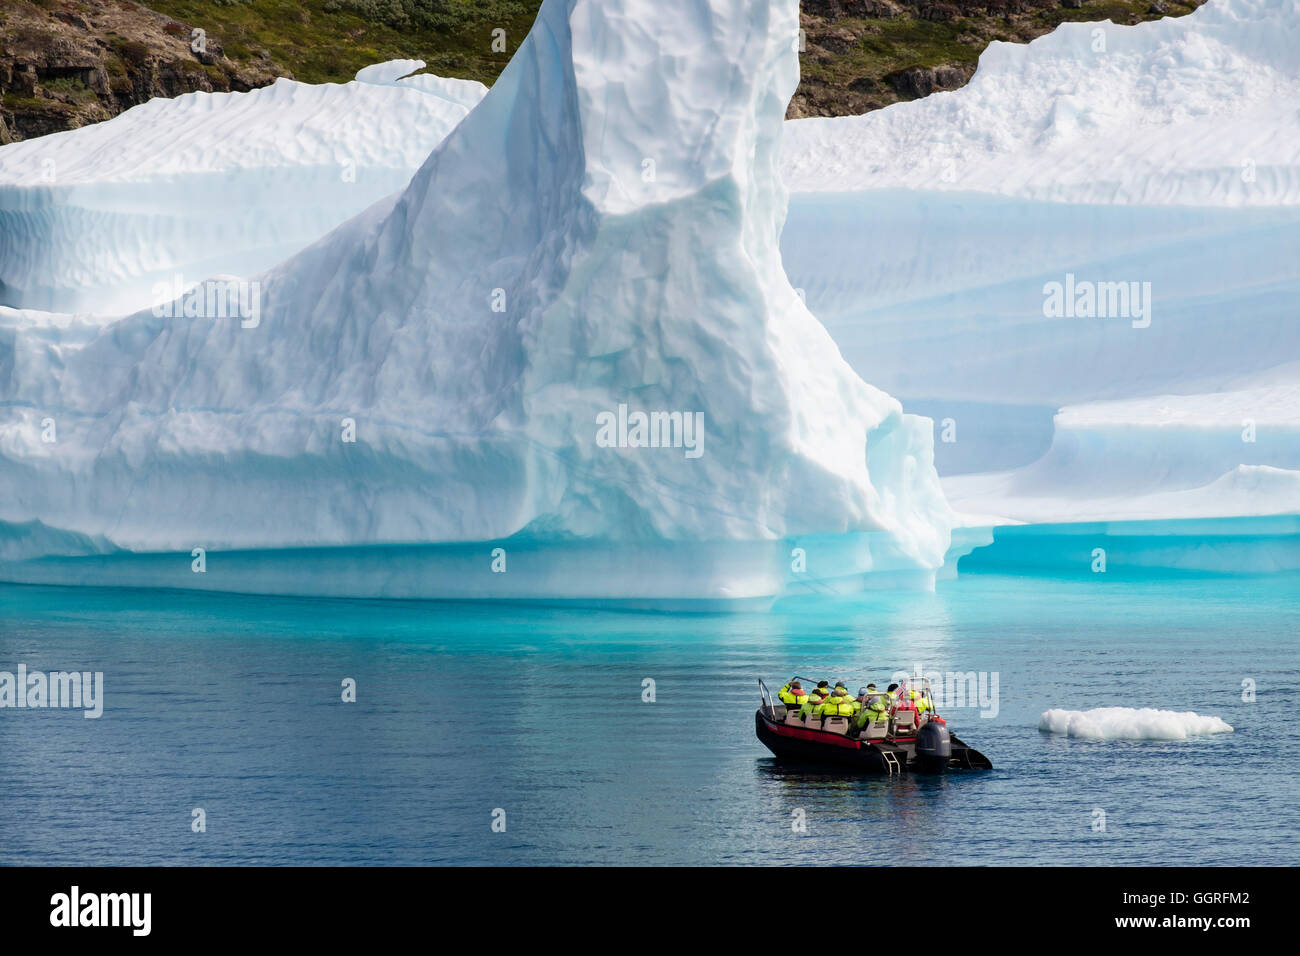 Tourists sailing in a small boat close to large Icebergs from Tunulliarfik ice fjord in summer. Narsaq, South Greenland Stock Photo